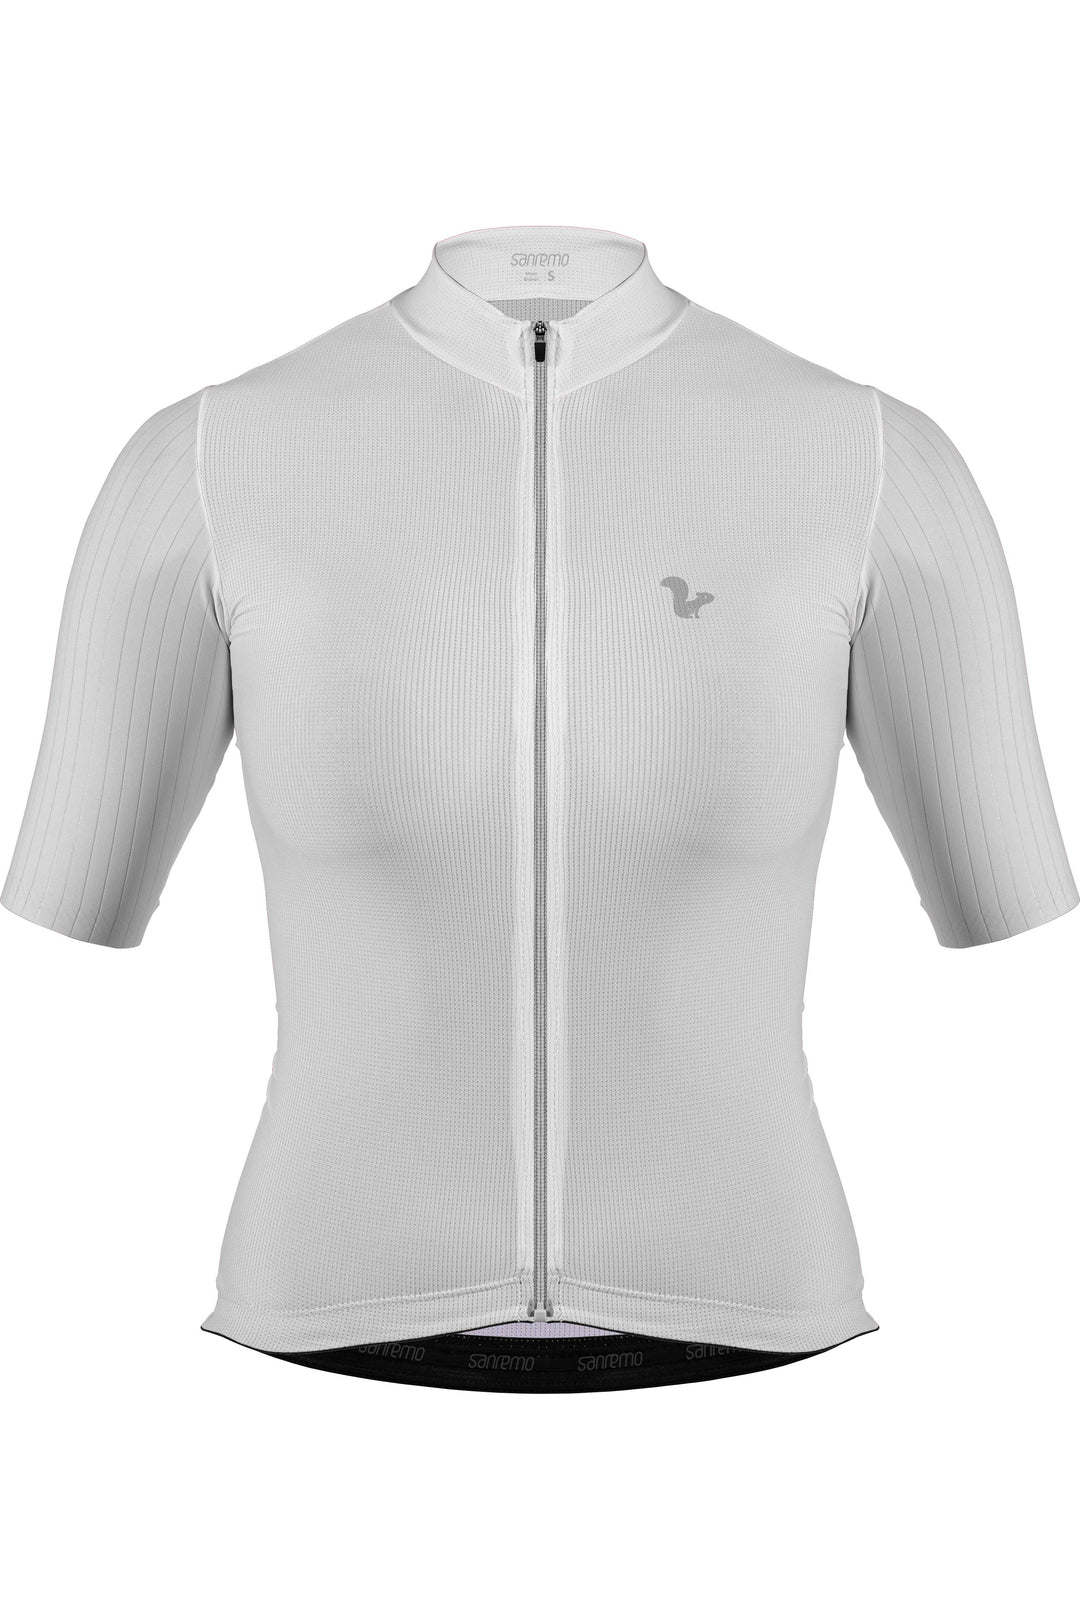 Jersey Corsa WH - Mujer